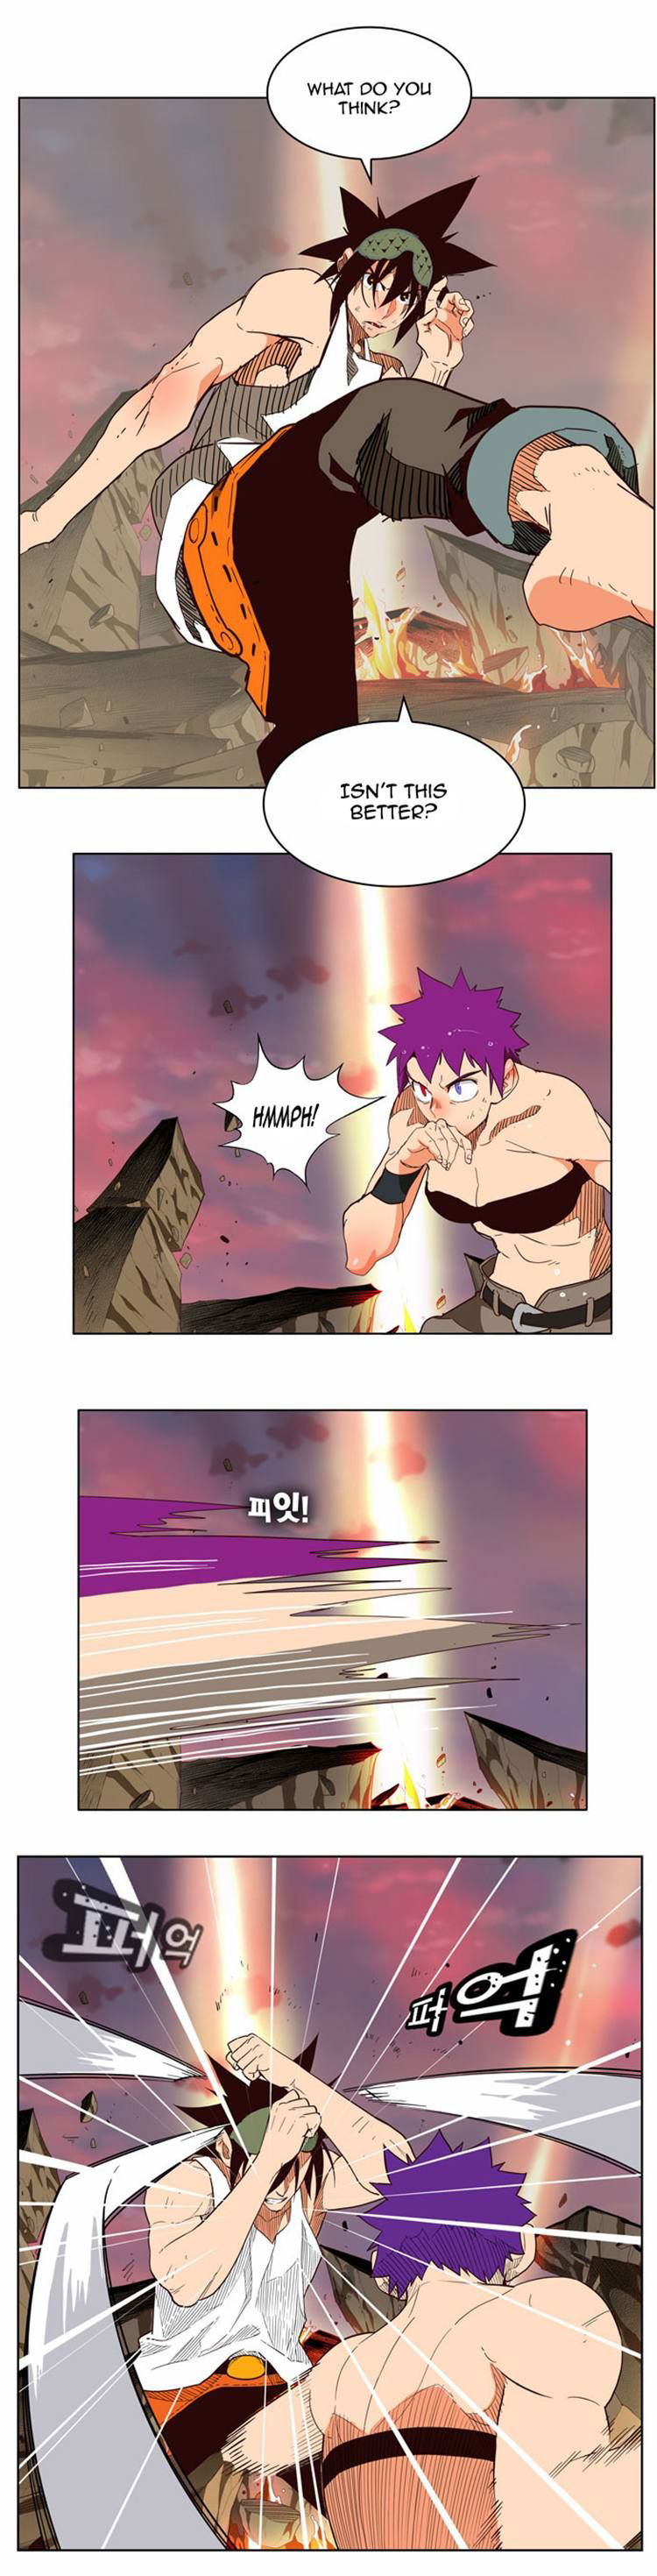 The God of High School Chapter 164 - Version 2 page 21